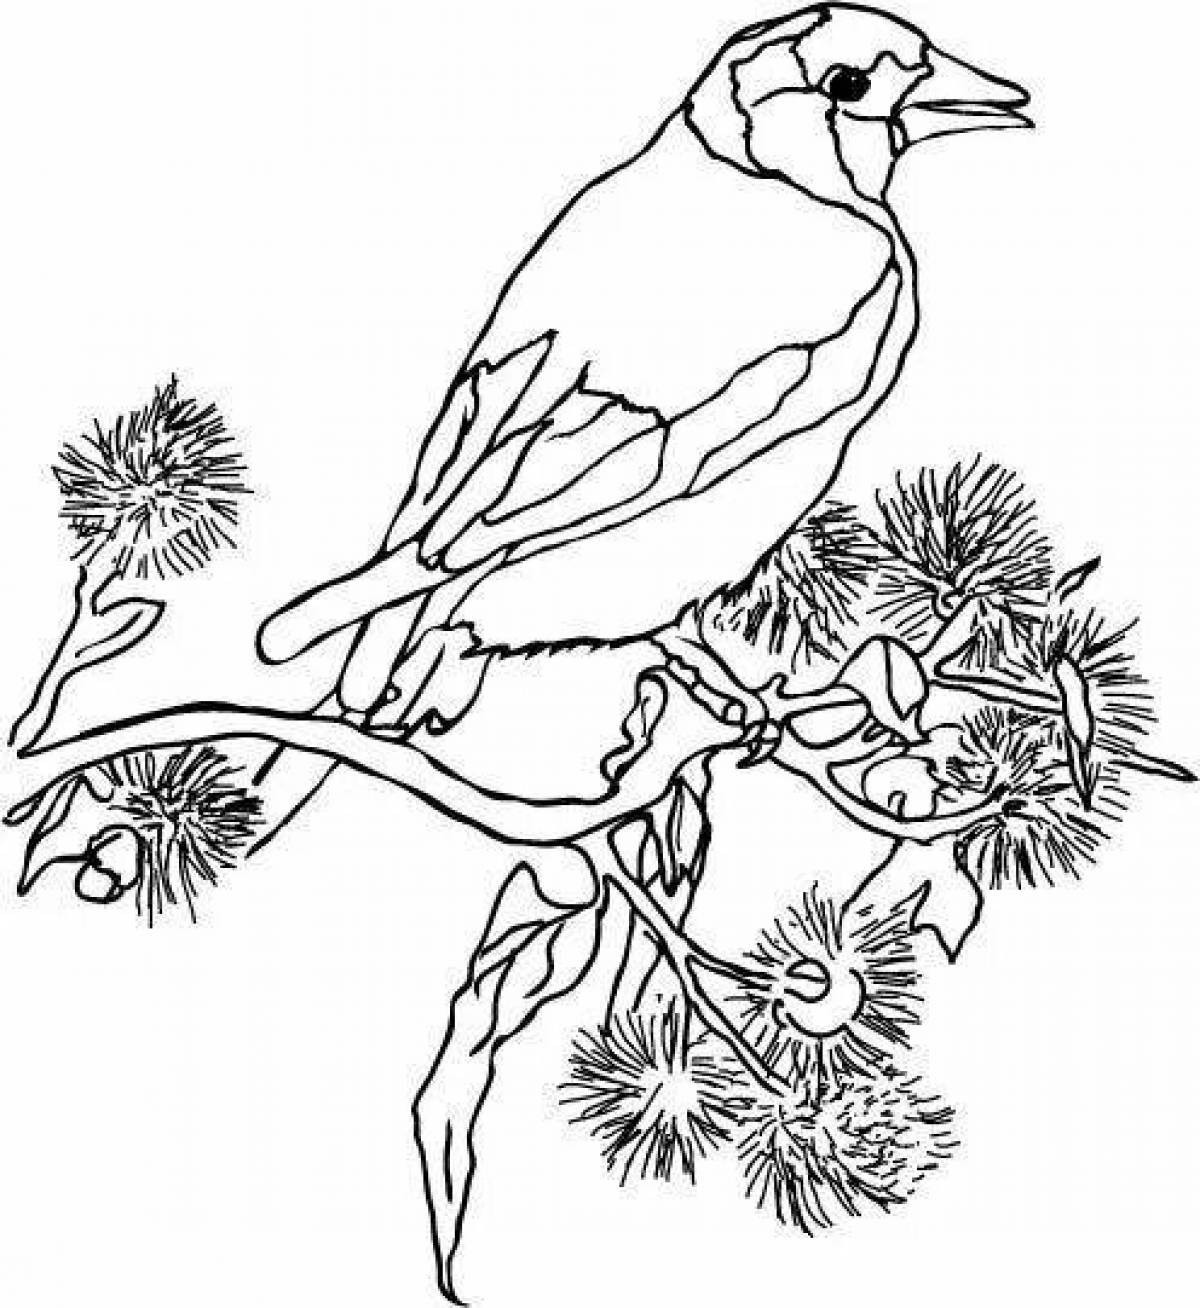 Adorable goldfinch coloring page